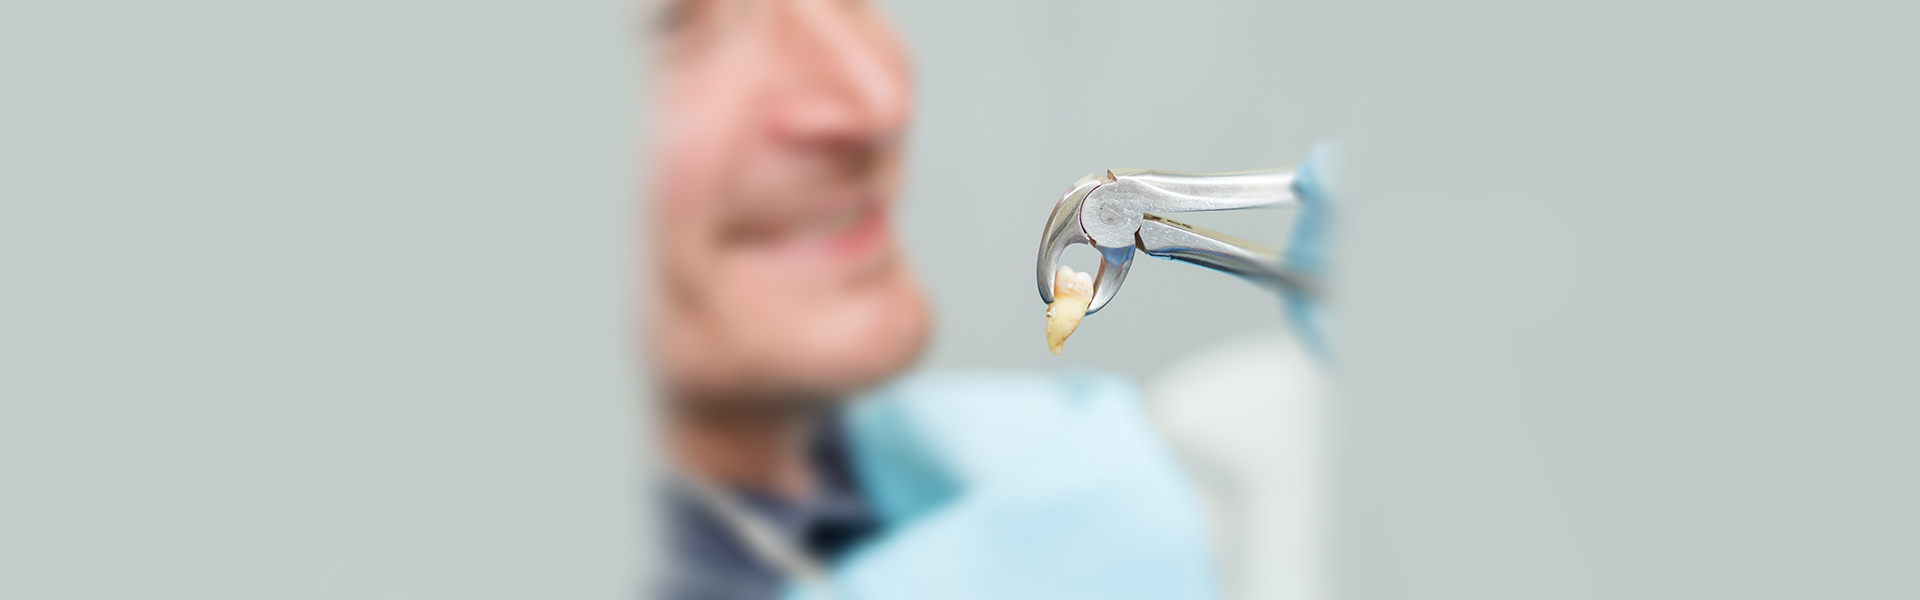 CAN TOOTH EXTRACTION BE PERFORMED ON A DIABETIC PATIENT?